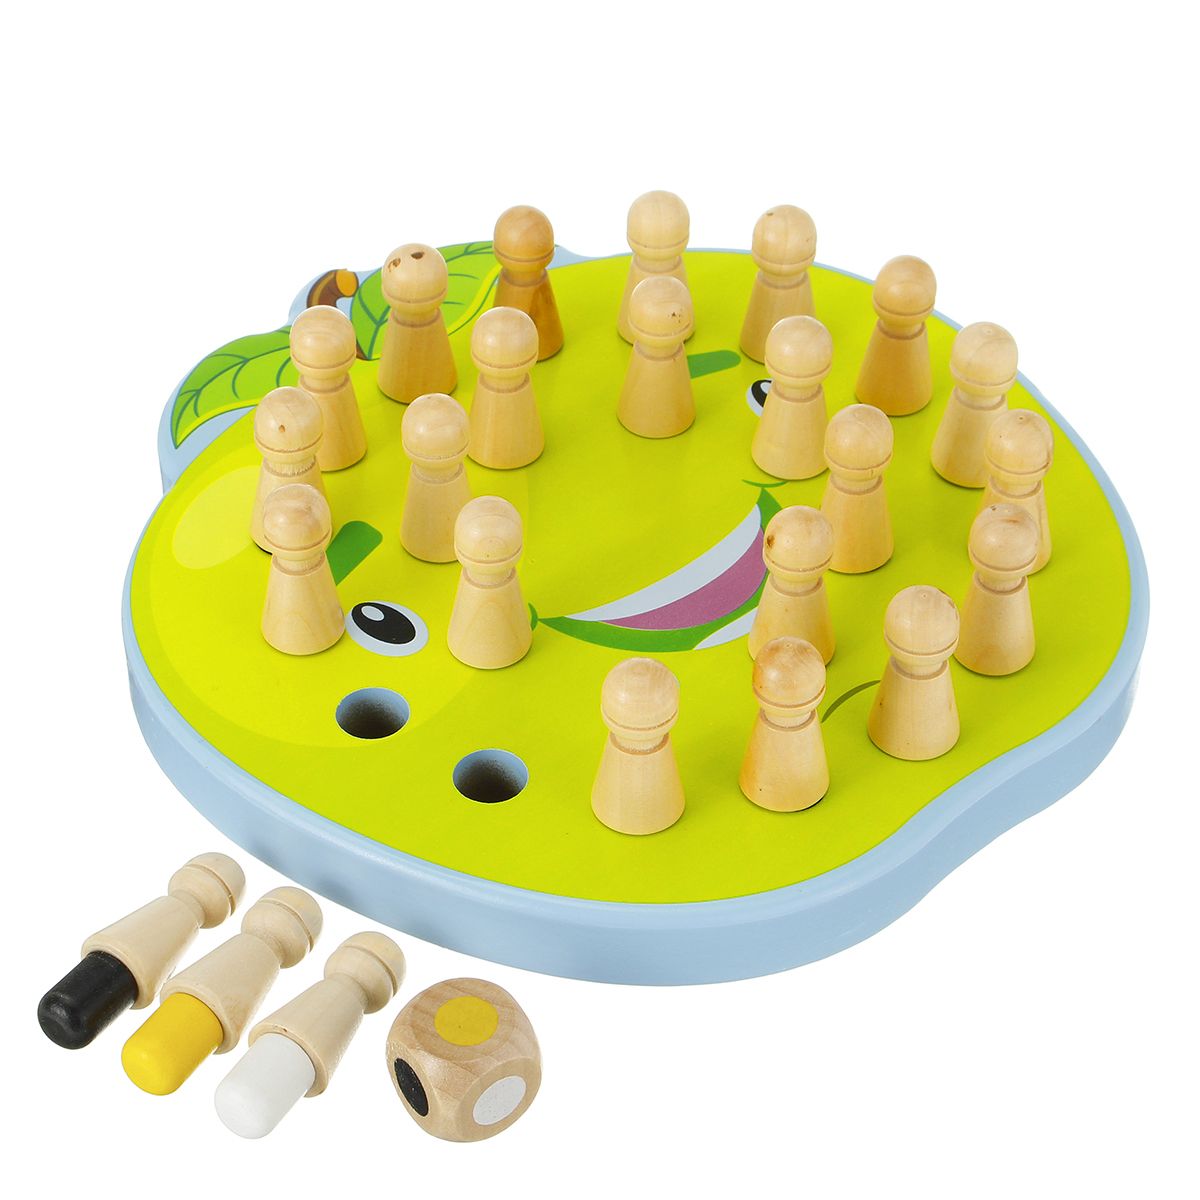 2-in-1-Wooden-Memory-Chess-Baby-Kids-Educational-Toys-Parent-Child-Leisure-Fun-1668286